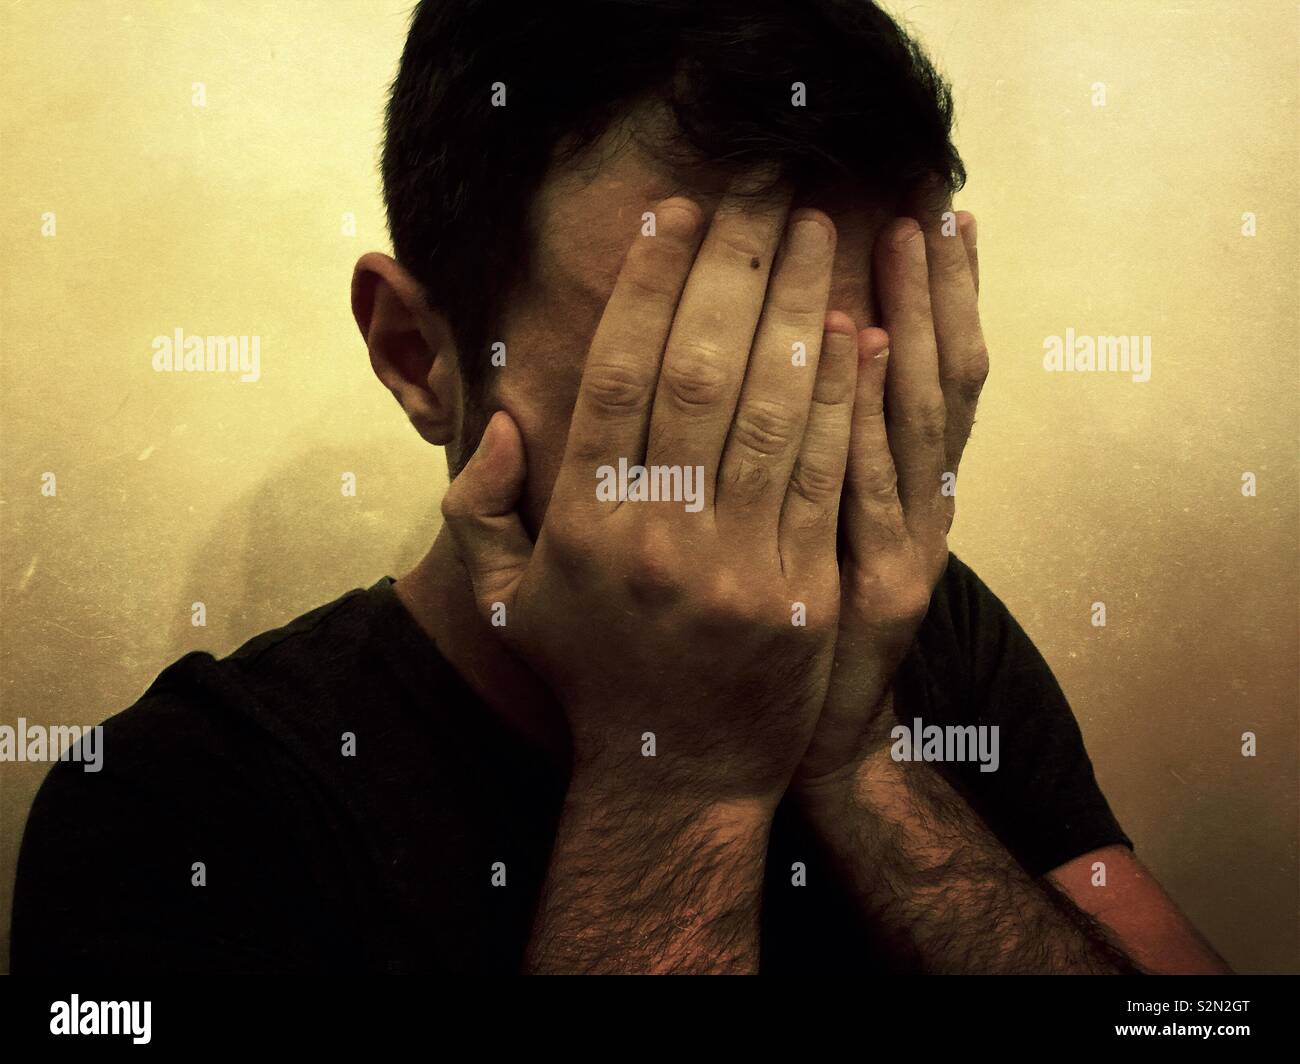 Depressed man hiding face with hands Stock Photo